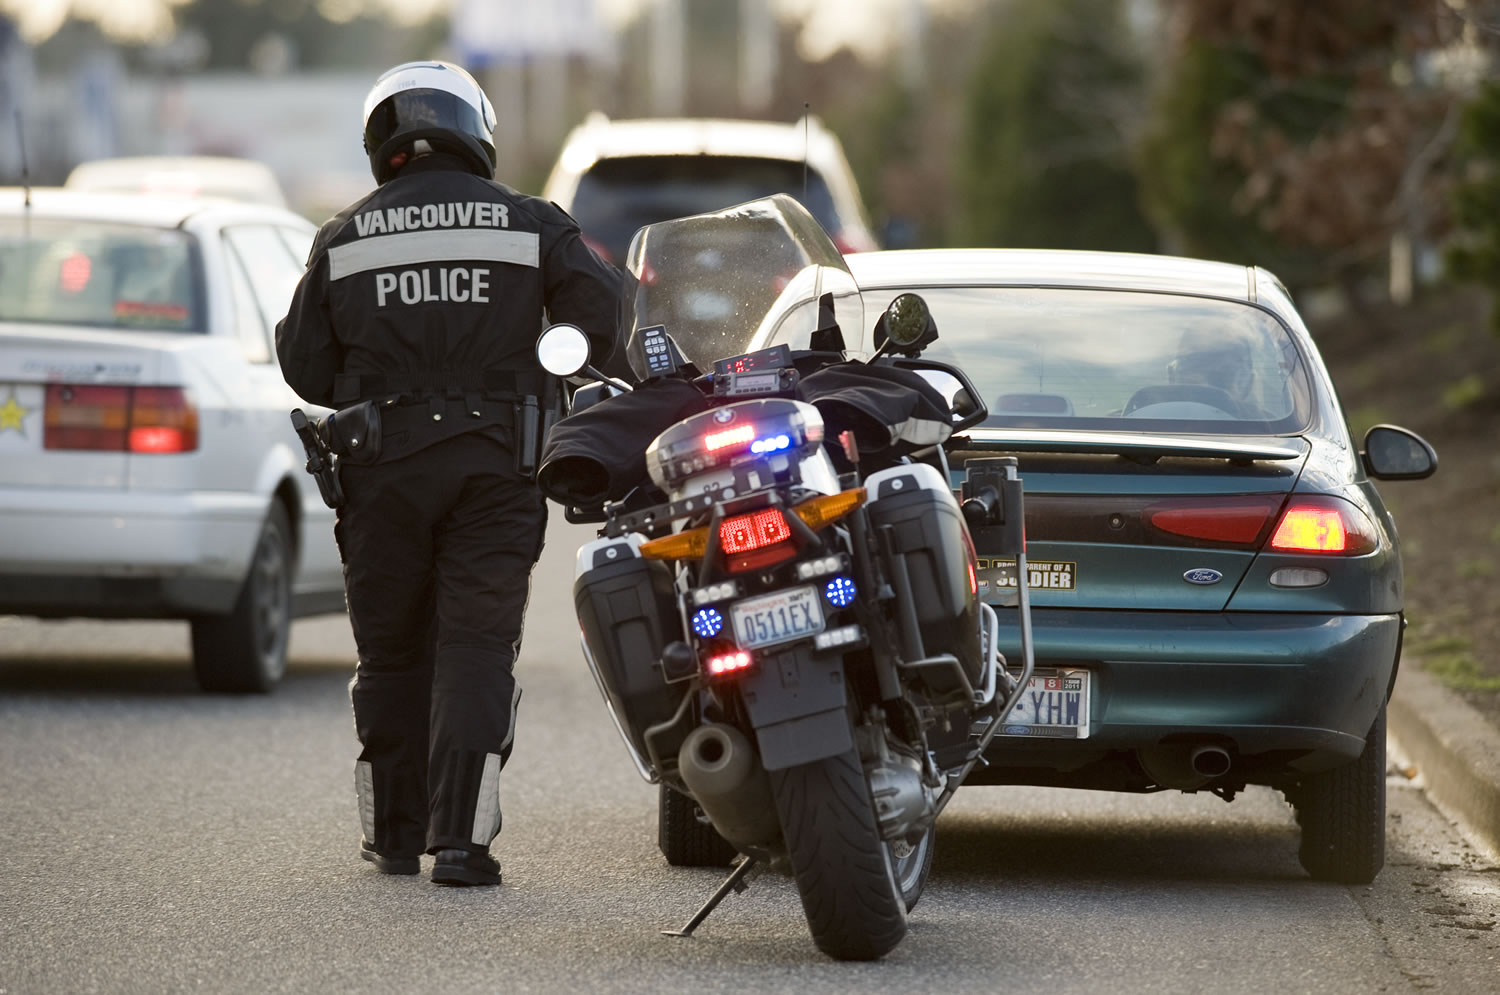 A Vancouver Police Officer makes a traffic stop for speeding in 2010.